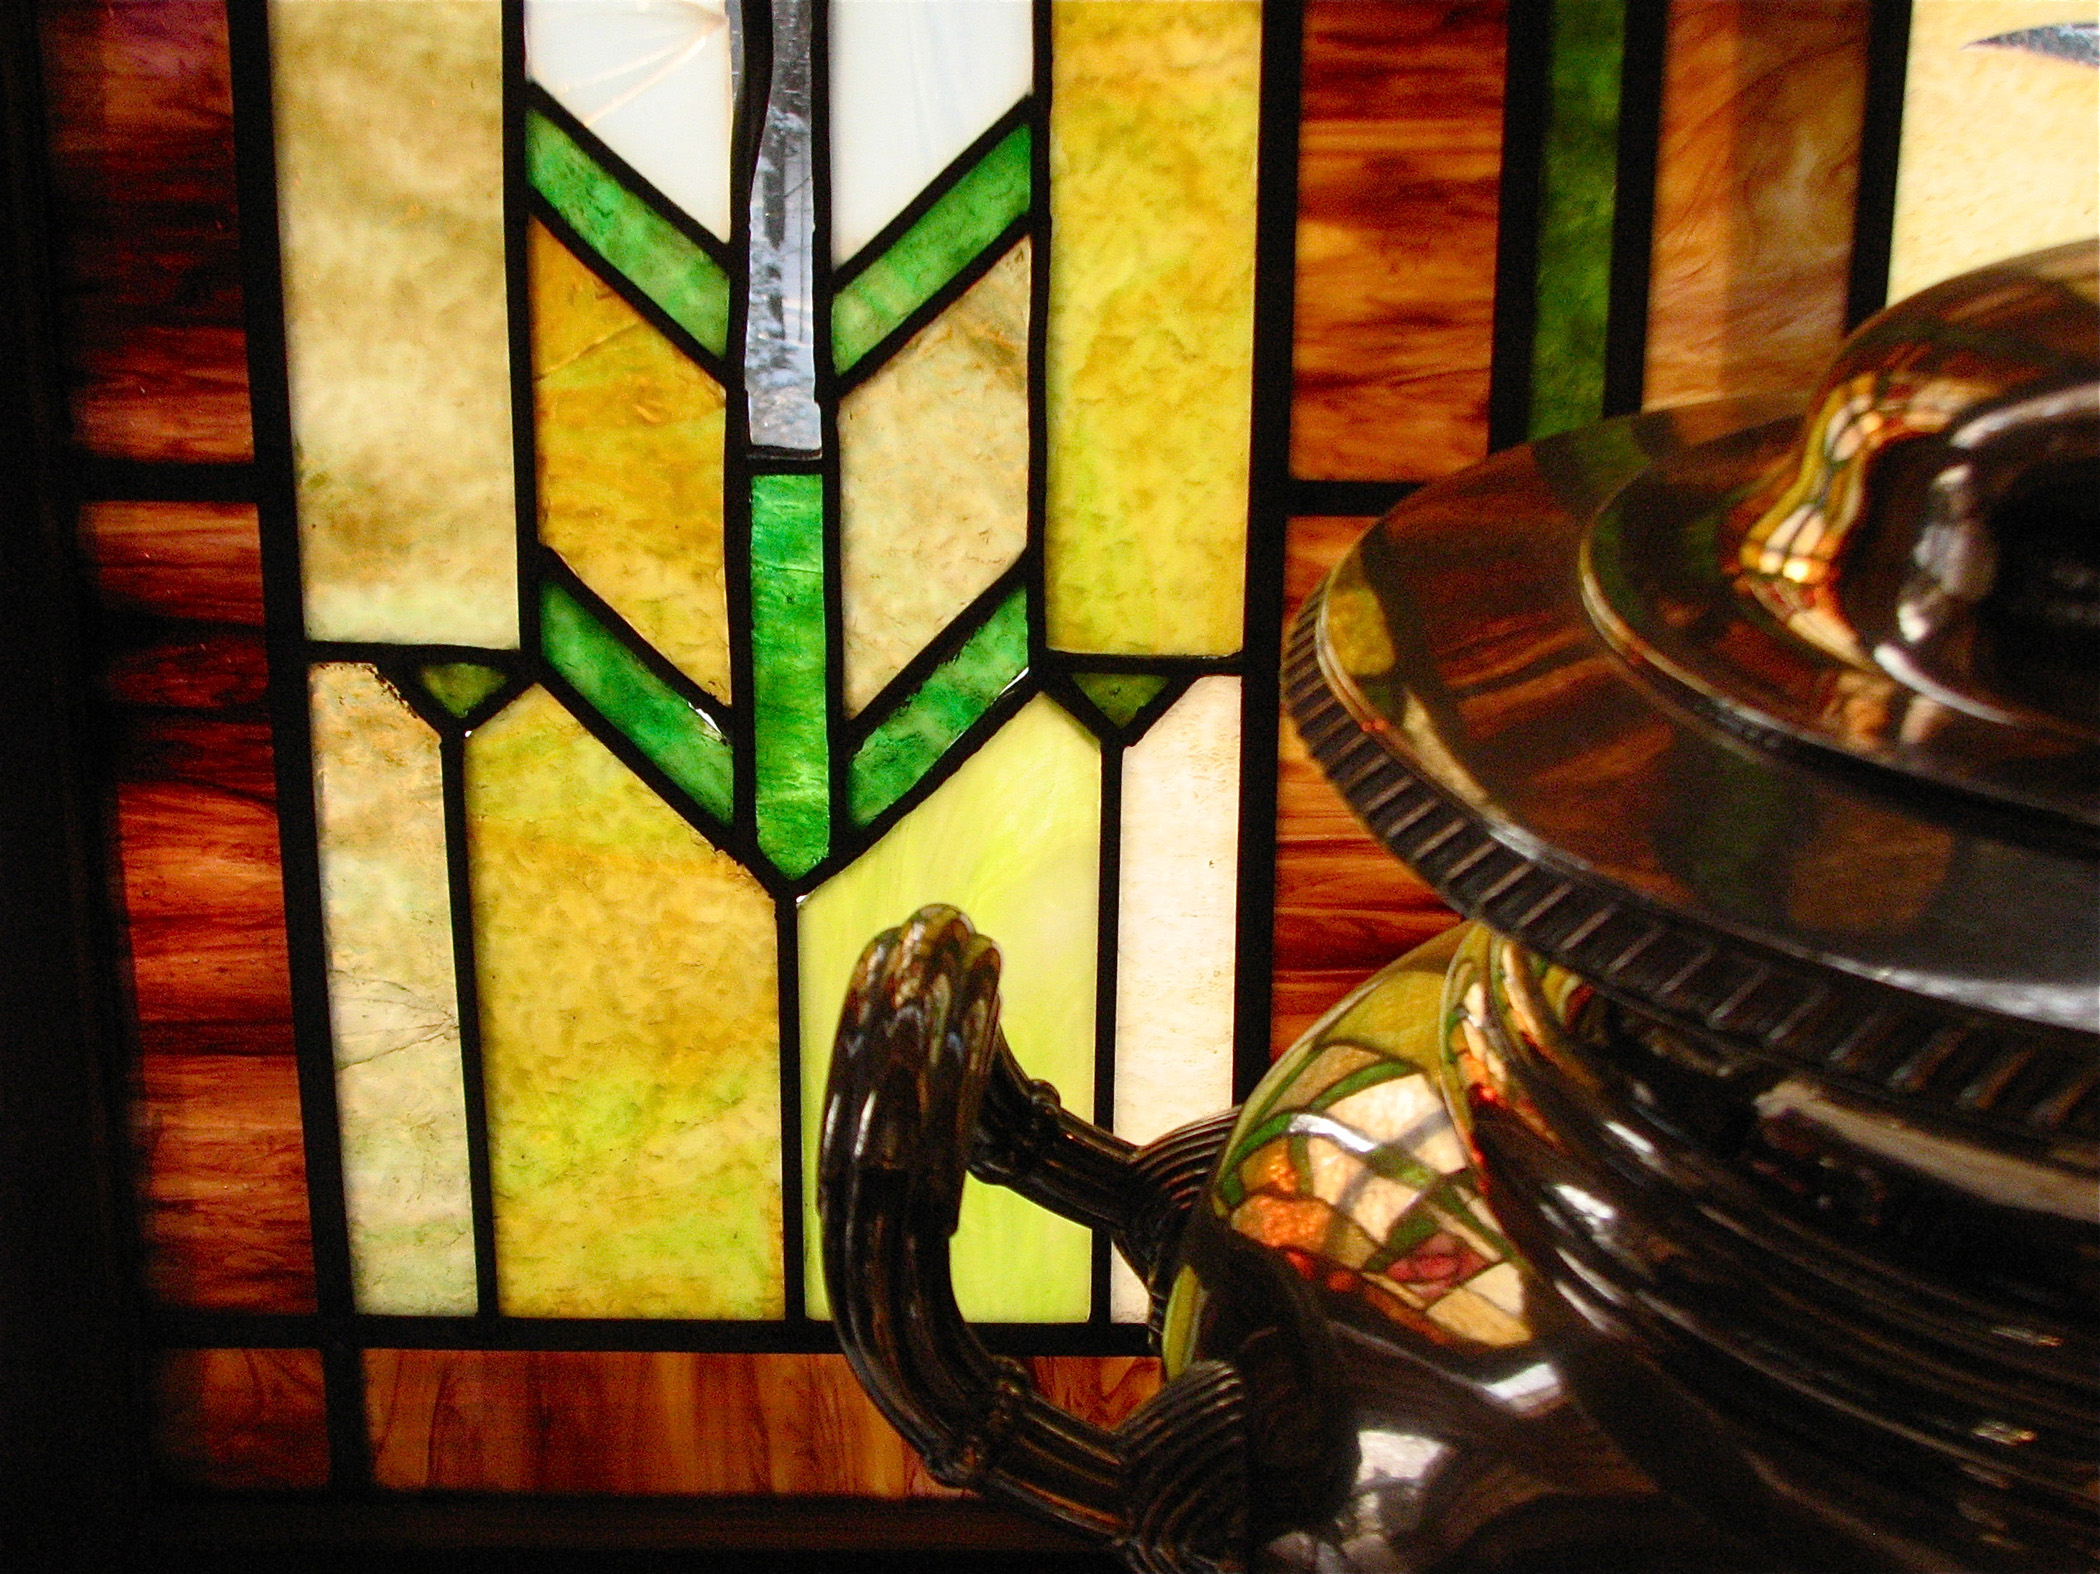 Samover, Stained Glass, And A Winter Sapling (user submitted)